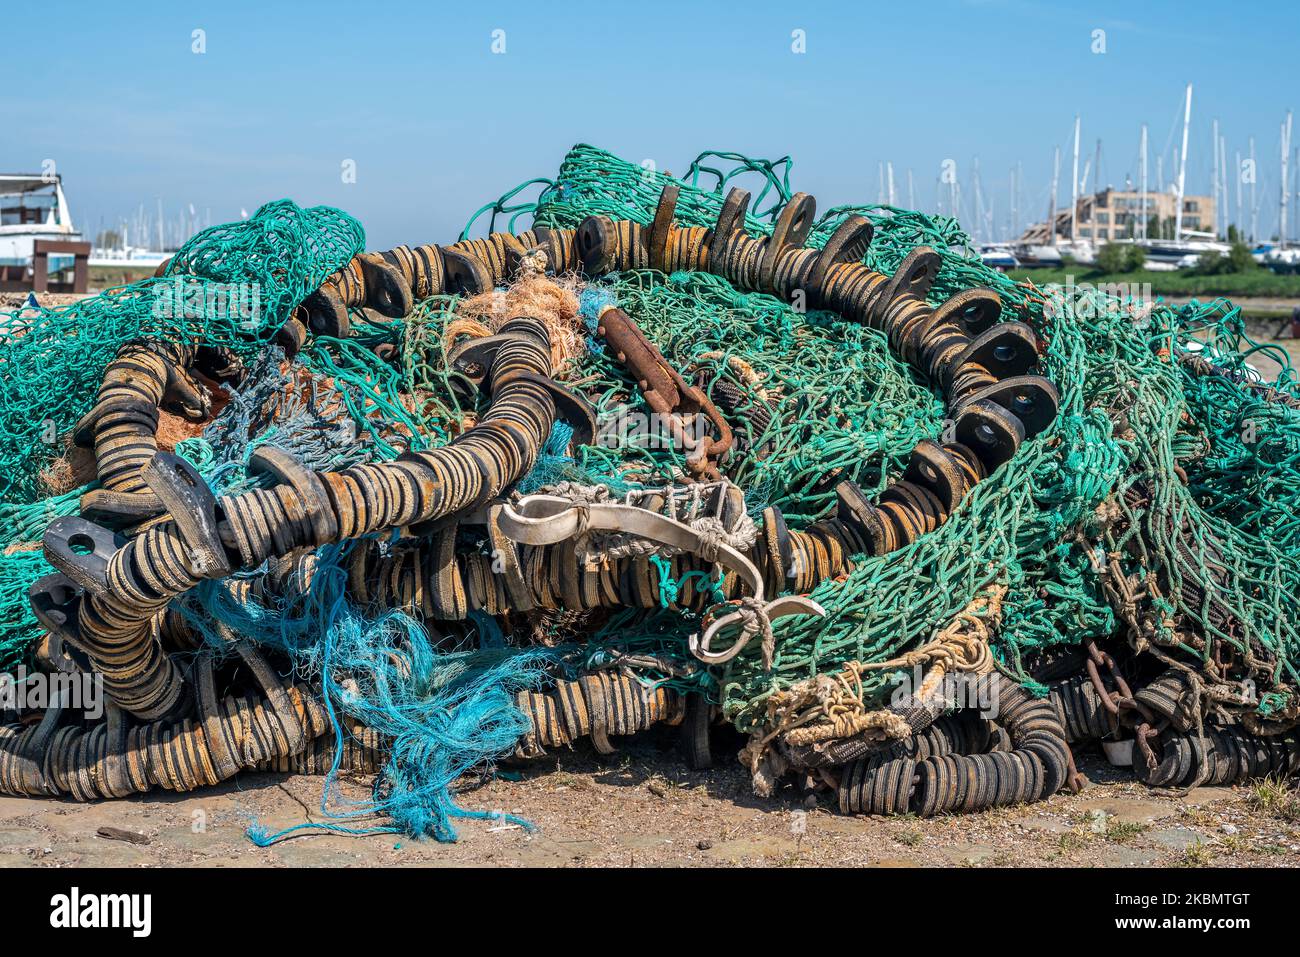 General view of abandoned fishing nets at the Nieuport (niewpoort) harbour along side the North Sea Belgian coast. As on 22 April 2020 the European Council adopts rules to help the European fishermen.New rules intended to mitigate the impact of the COVID-19 outbreak on the fishery and aquaculture sector. The new rules take the form of amendments to the regulation on the European maritime and fisheries fund (EMFF) and the regulation on the common market organisation (CMO). They are expected to enter into force by the end of the week. 23 April 2020 Jonathan Raa / Nurphoto (Photo by Jonathan Raa/ Stock Photo